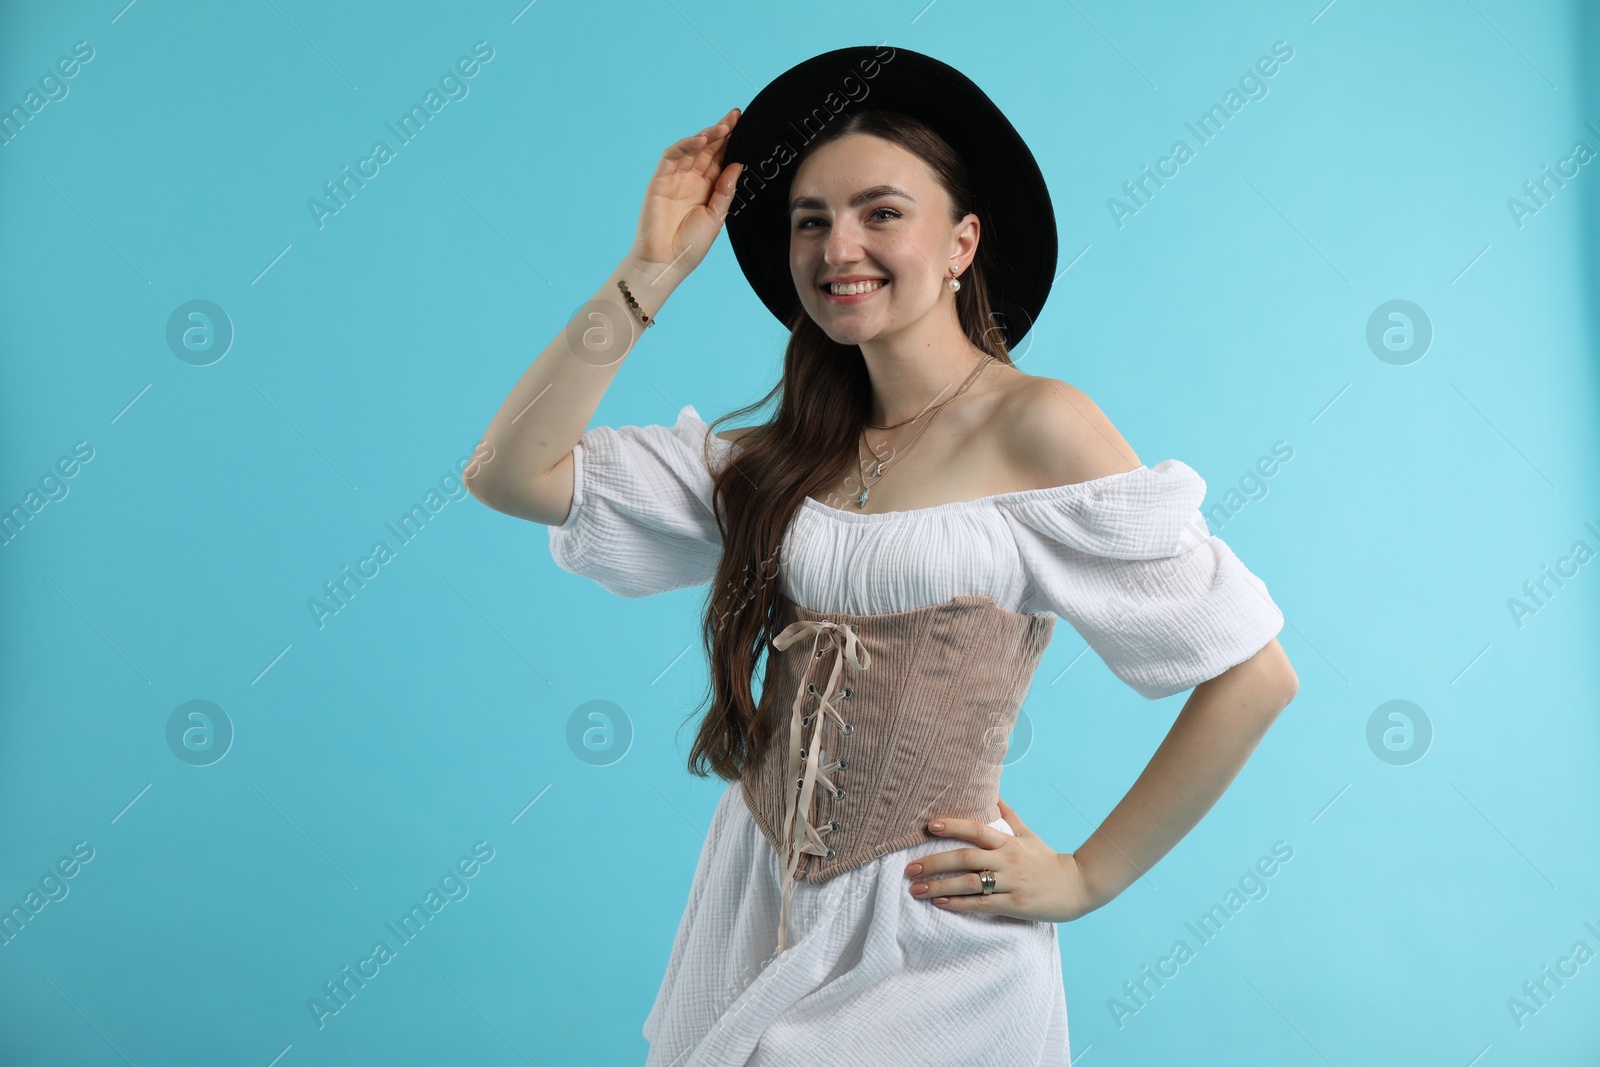 Photo of Smiling woman in velvet corset and hat posing on light blue background